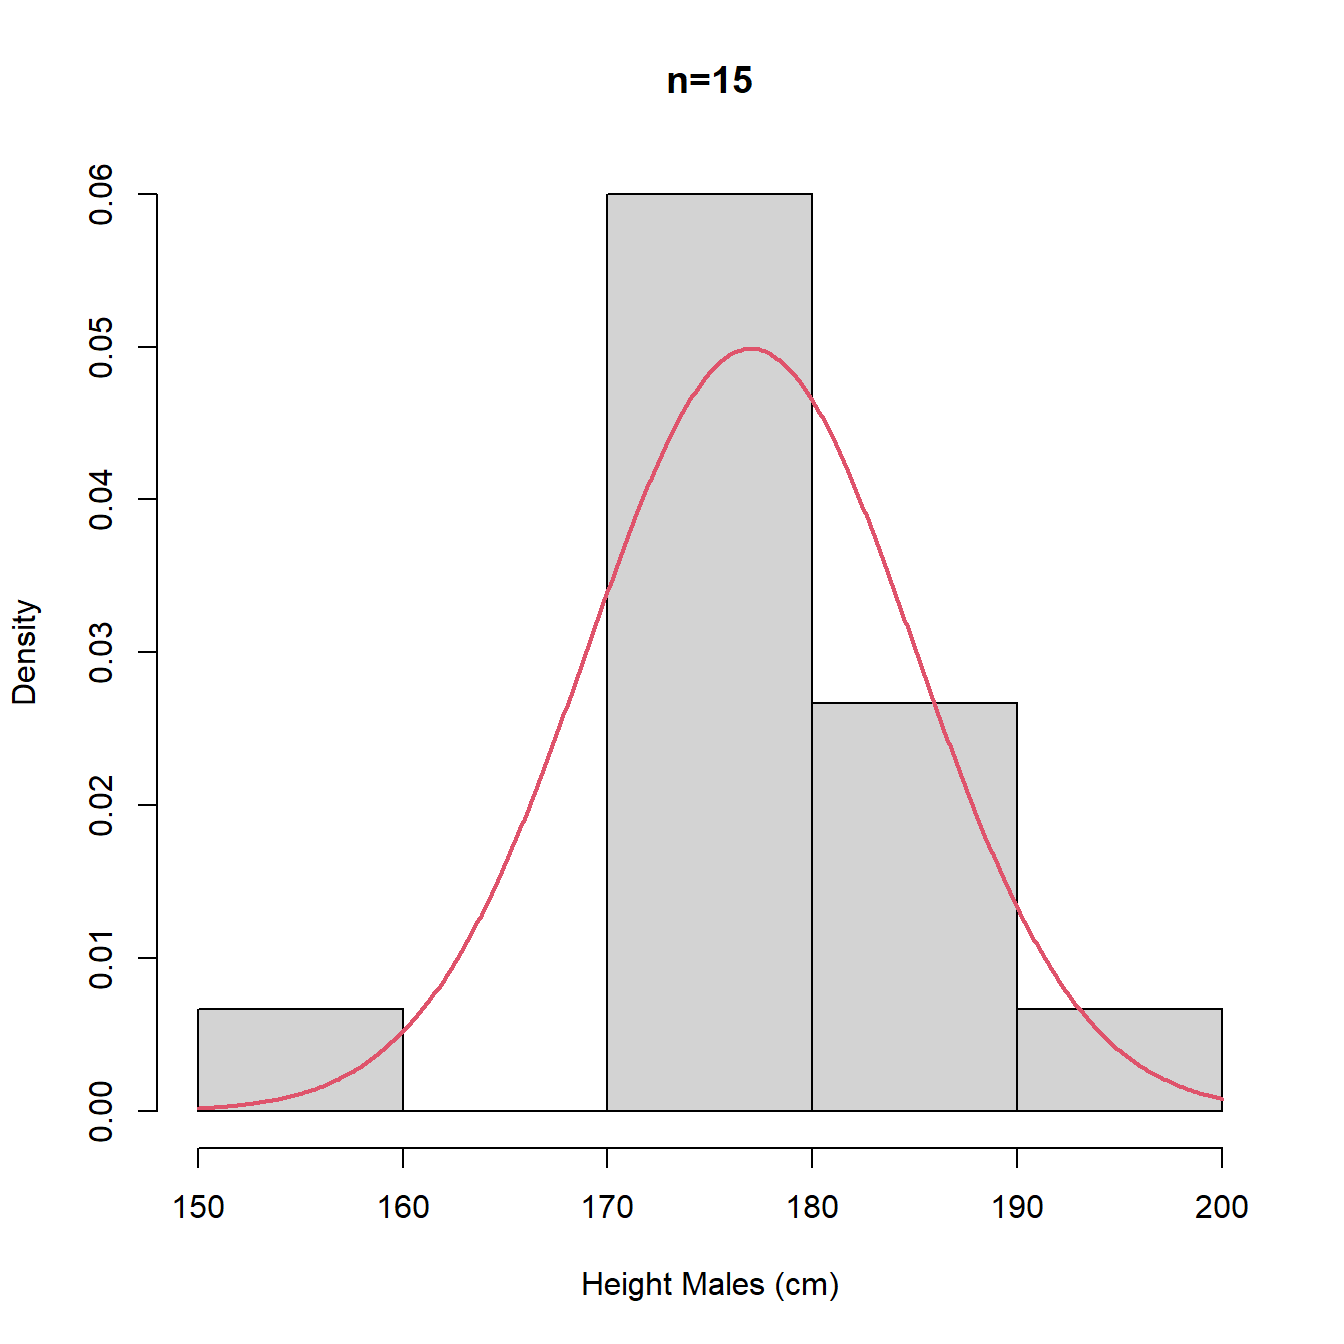 Histograms with different intervals